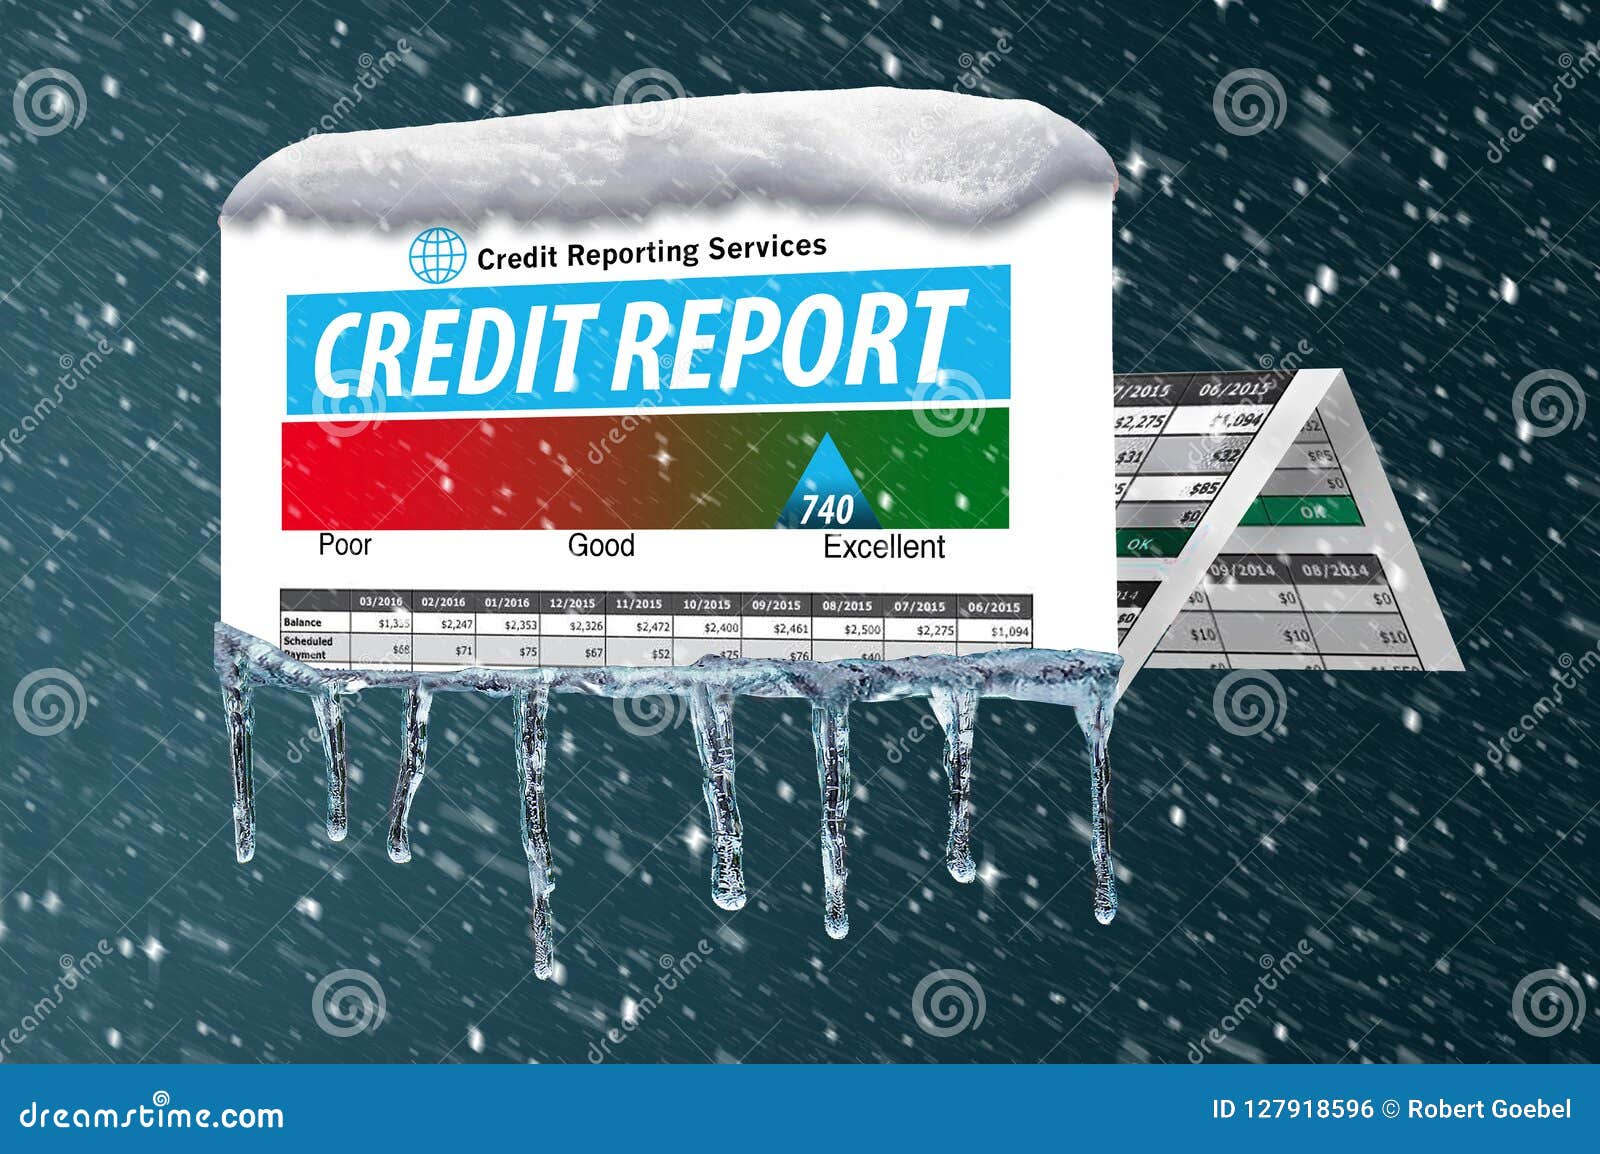 an icy, snow covered credit report in a snowstorm illustrates the idea of freezing your credit report.